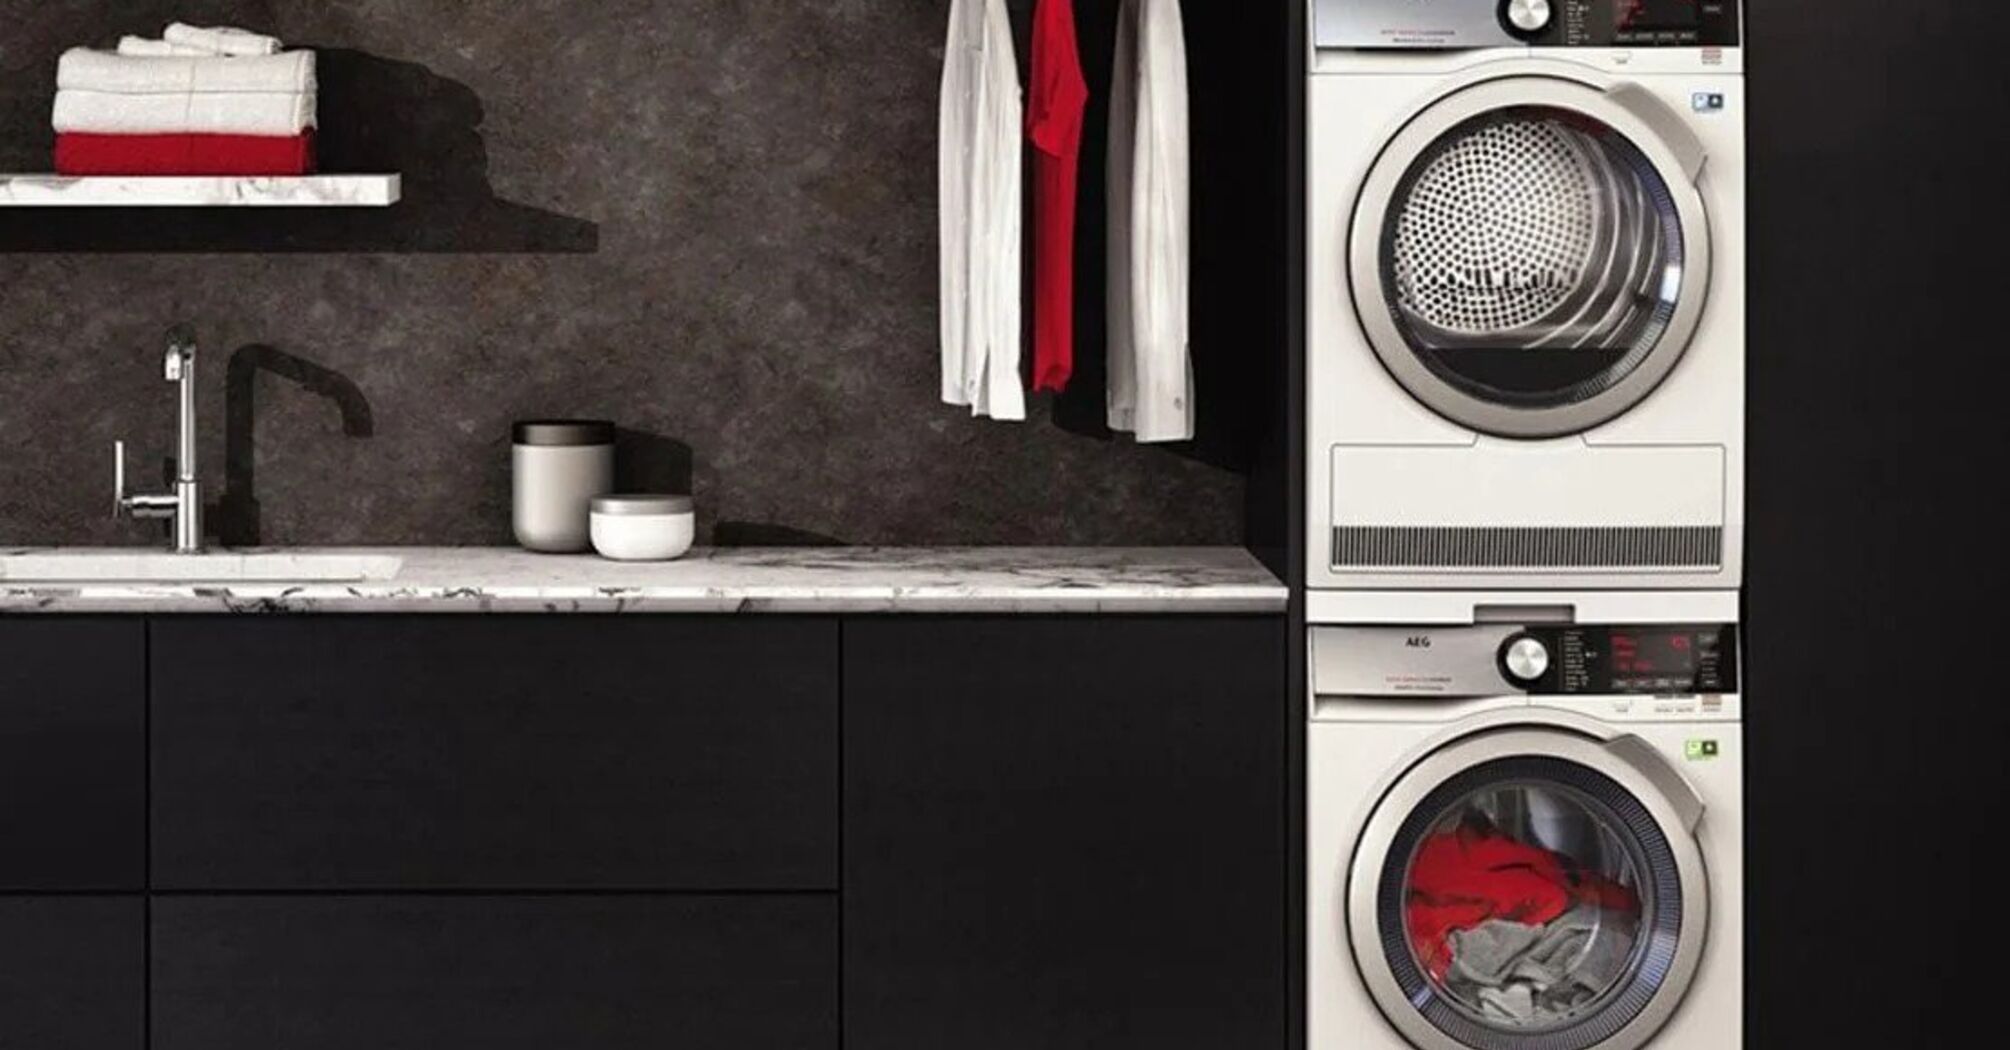 Comparing a washer-dryer and a tumble dryer